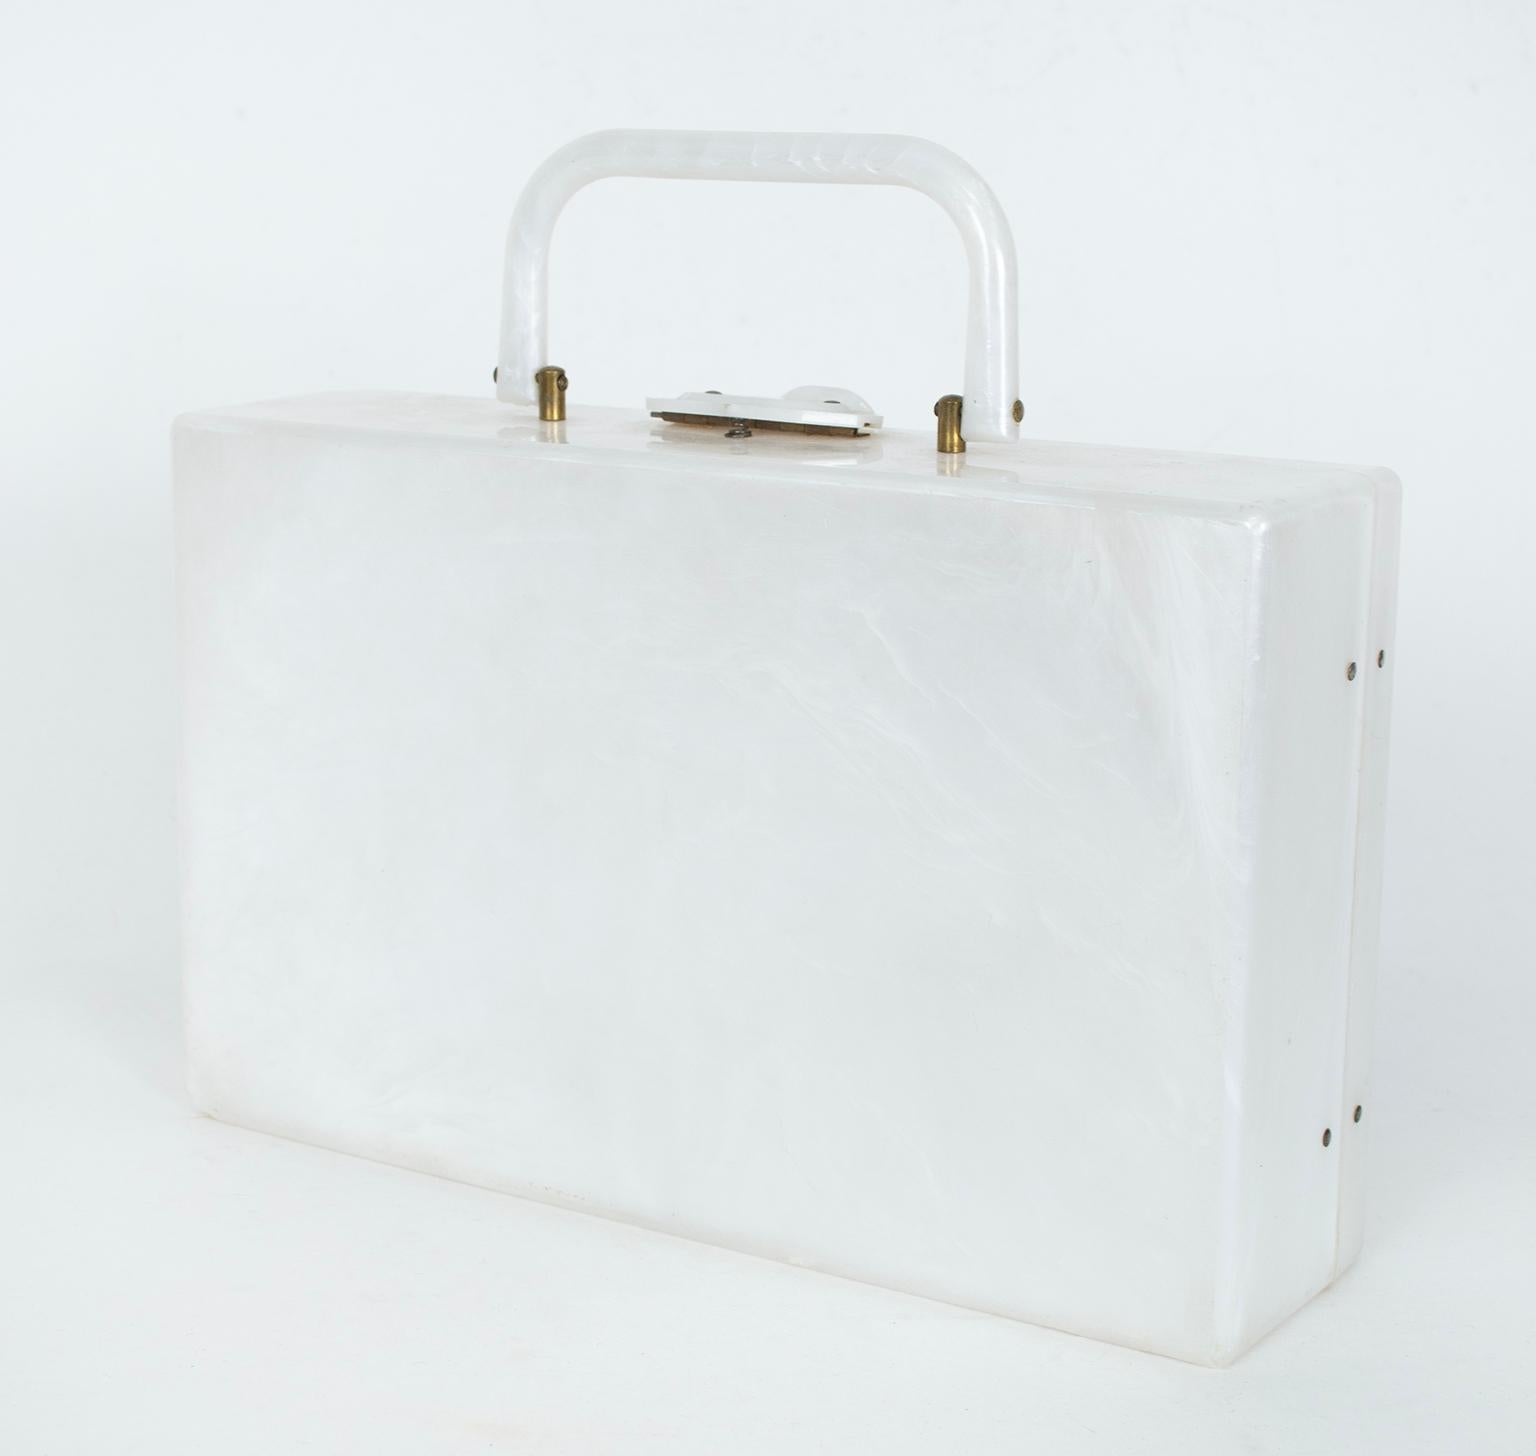 A rare suitcase-style Lucite purse, this statement piece is made even more interesting by the clear vinyl side bellows trimmed in gold. Both traditional and avant garde.

White marbleized Lucite suitcase purse with folding self top handle; hinged